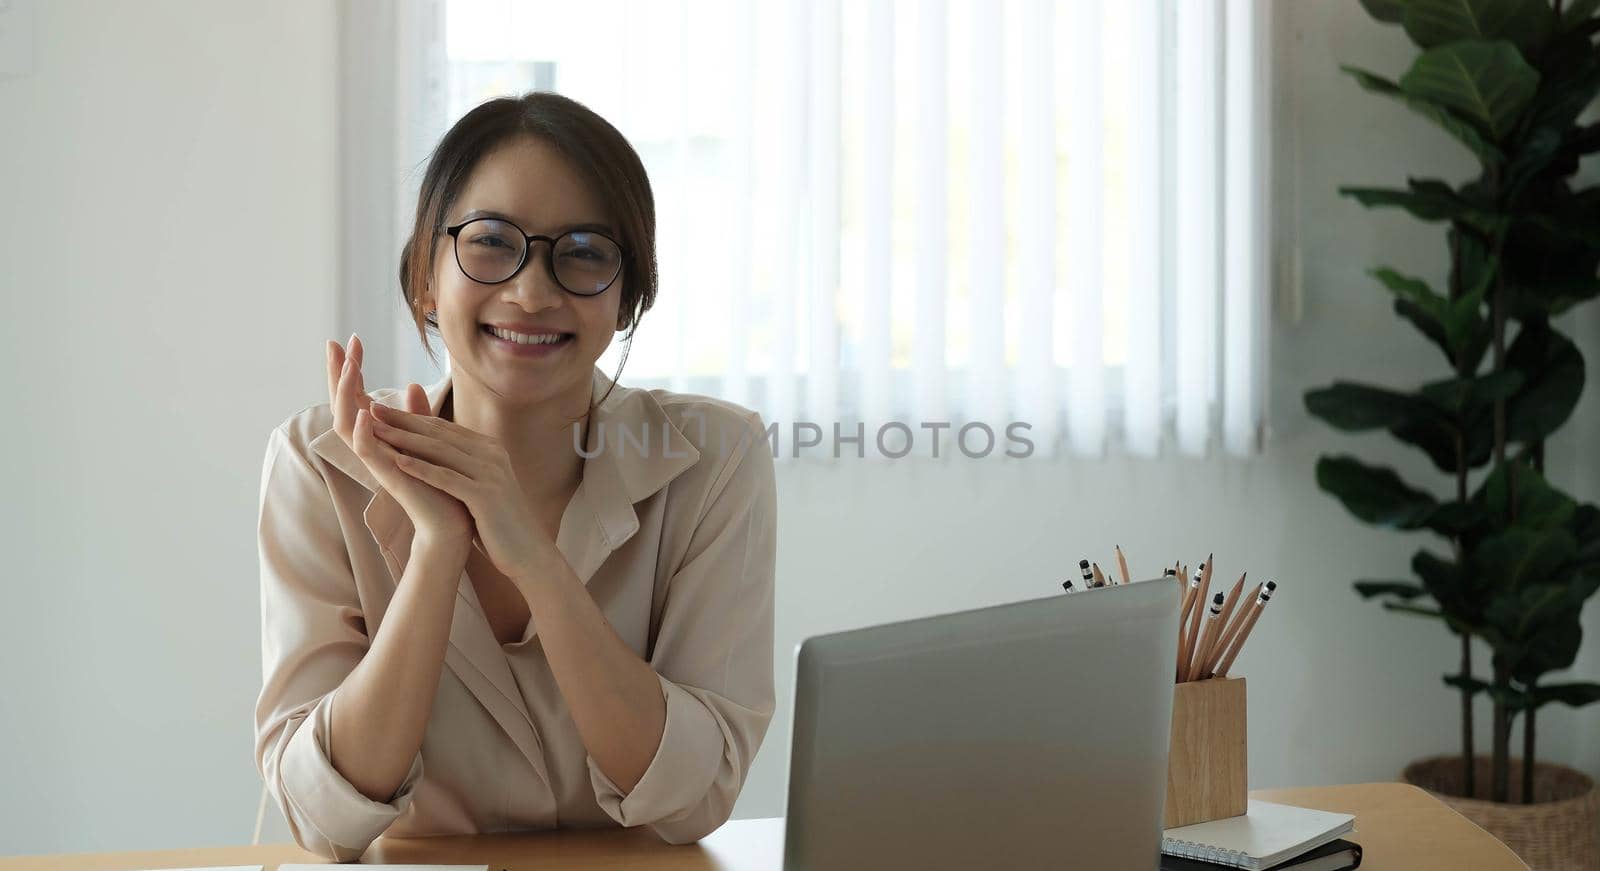 Portrait of smiling businesswoman sitting at desk in the office working on laptop
